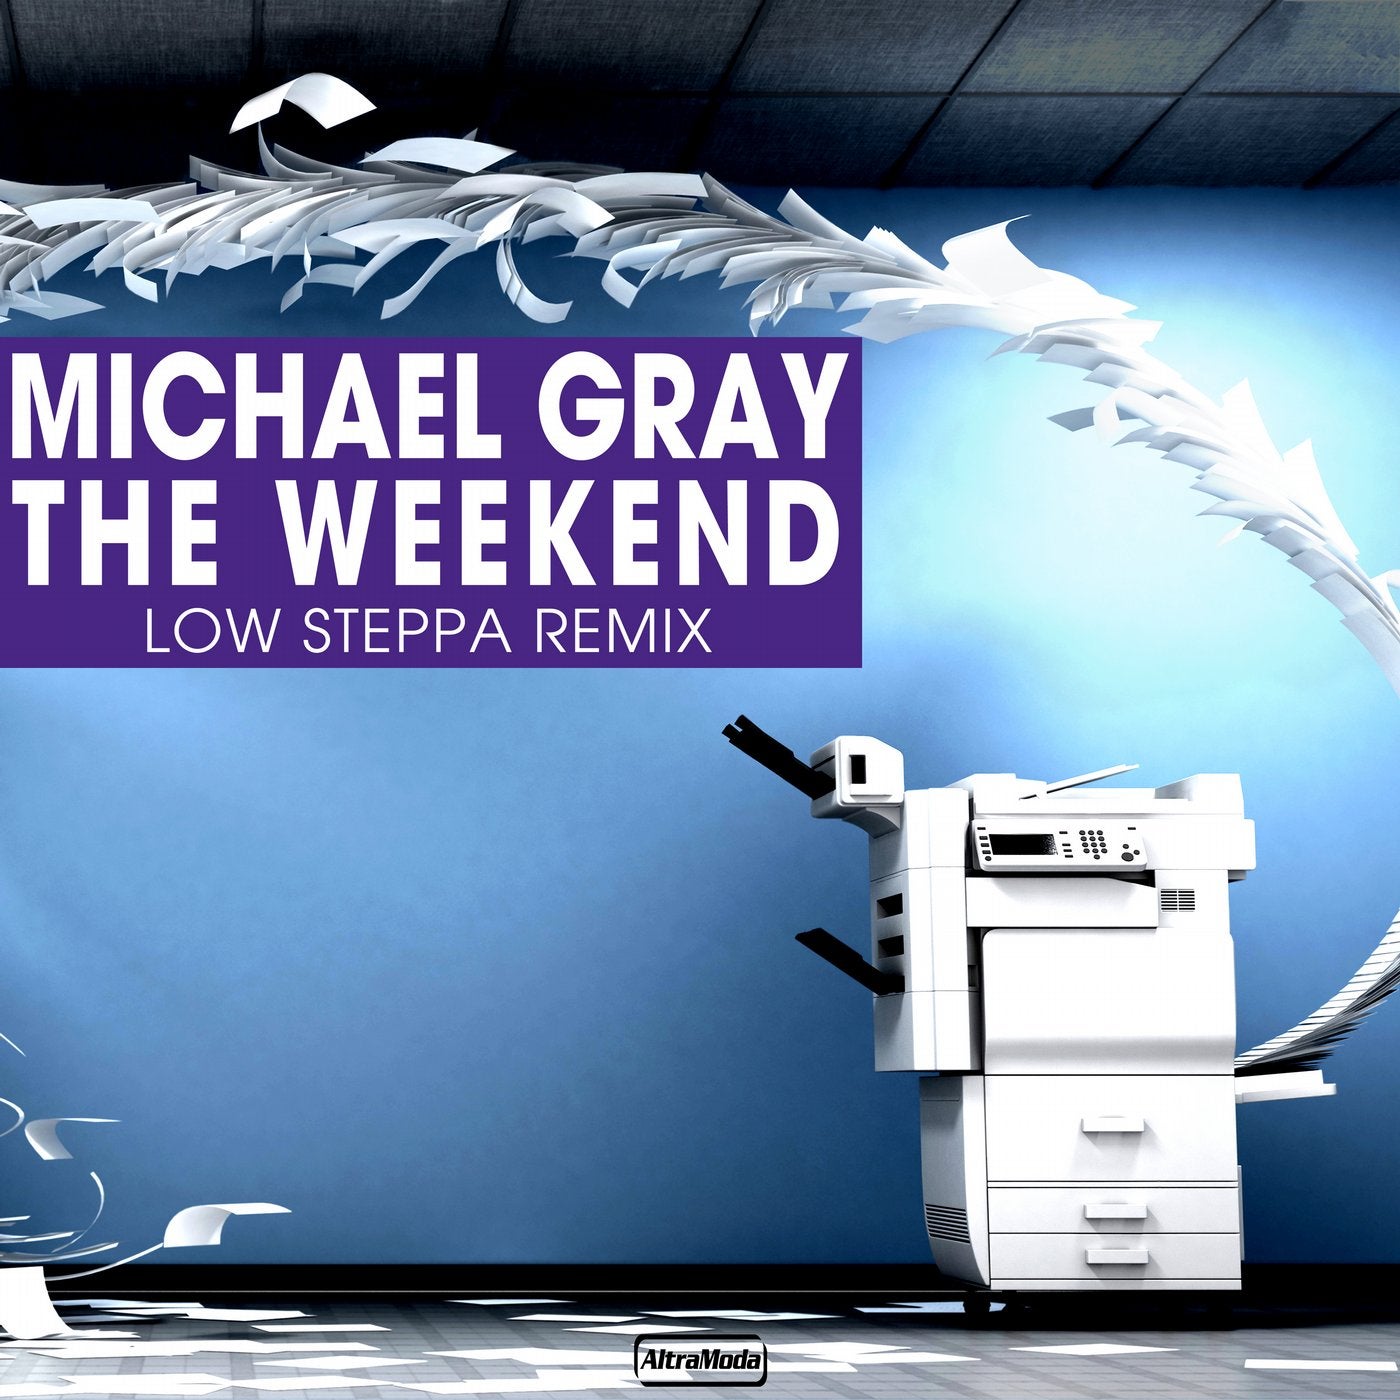 The Weekend - Low Steppa Remix